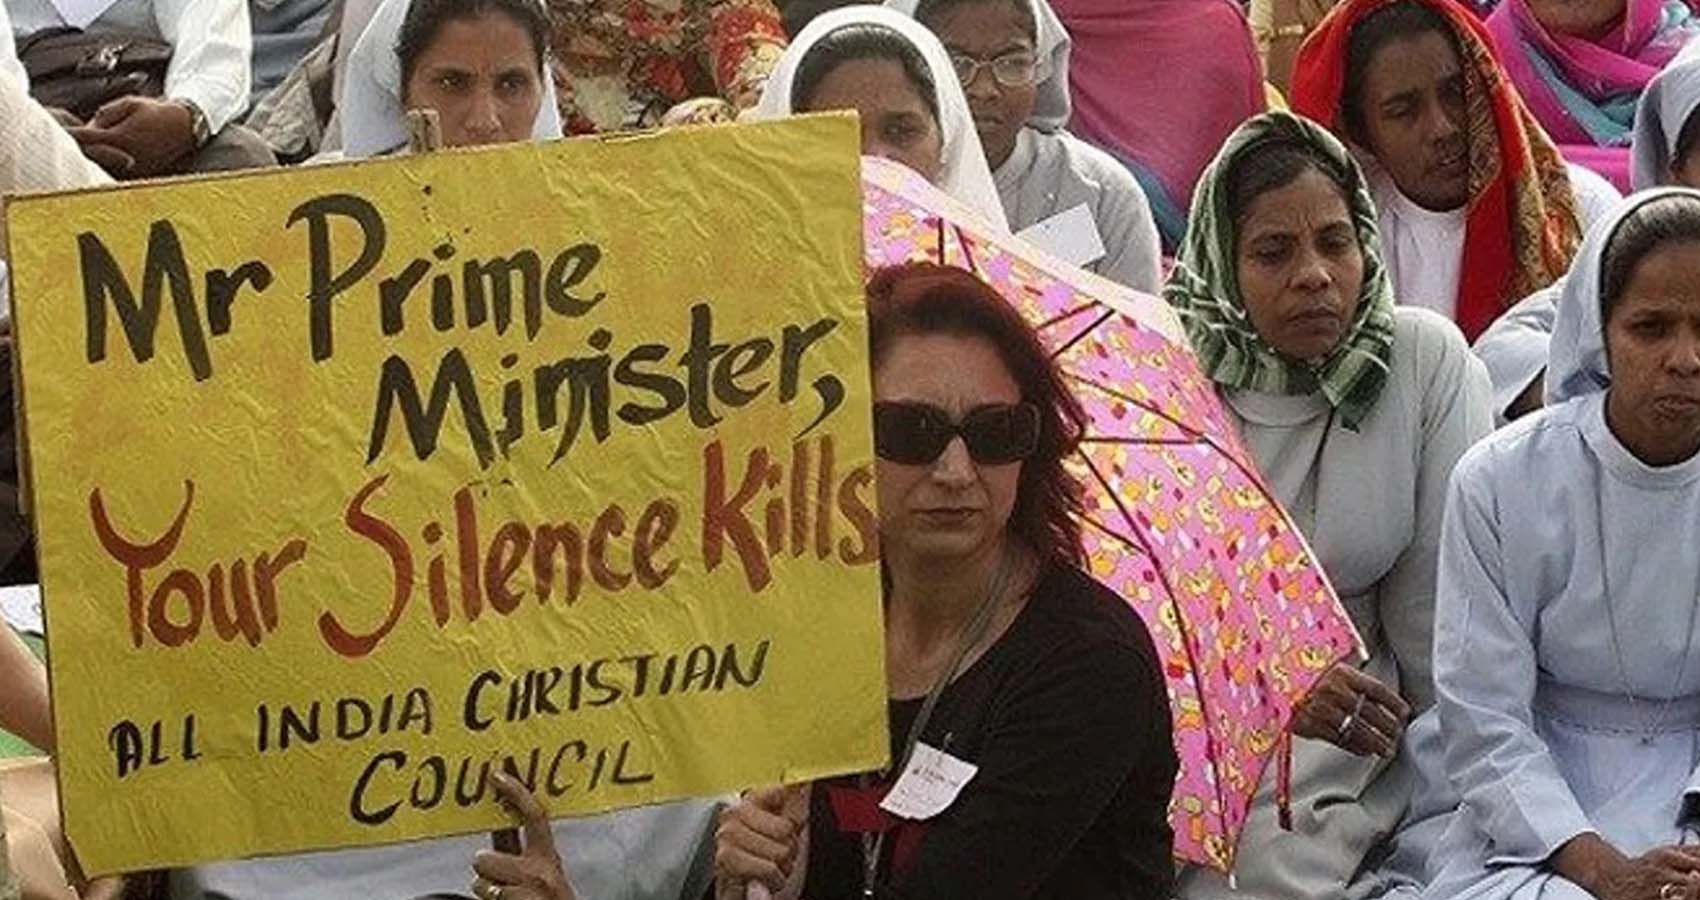 Congressional Briefing Exposes Widespread Christian Persecution In India